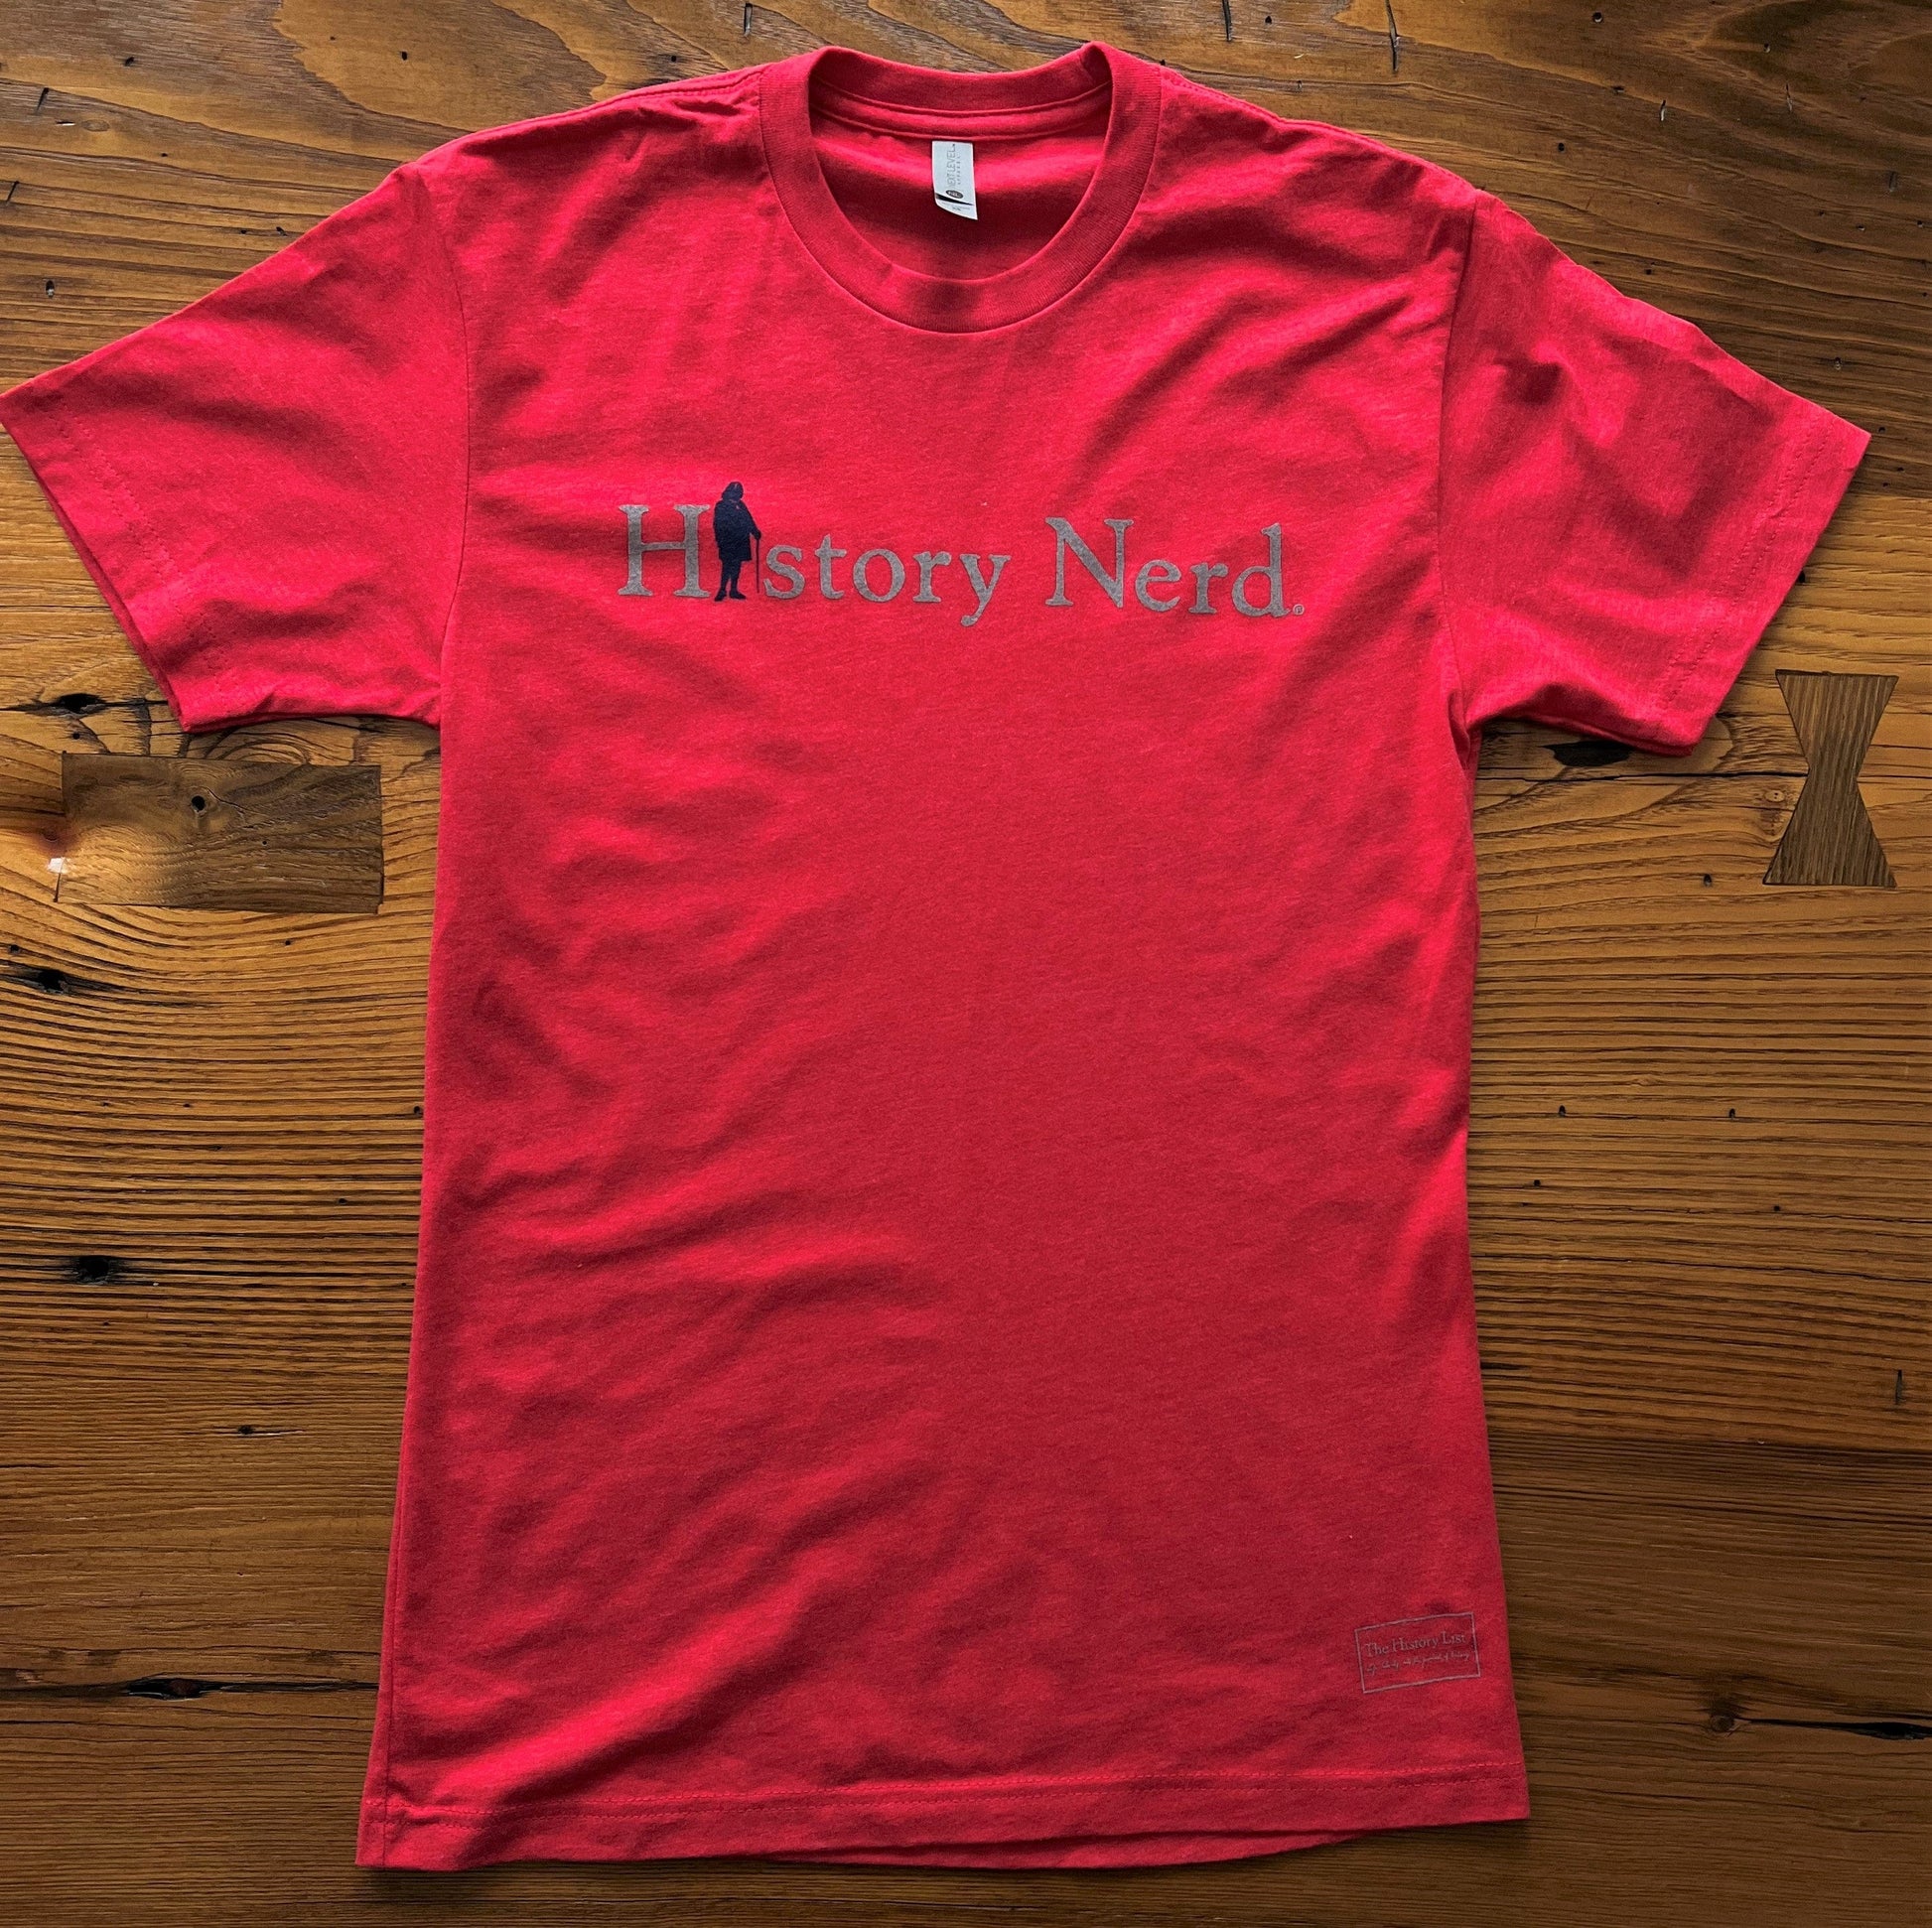 Red "History Nerd" shirt with Ben Franklin from The History List Store